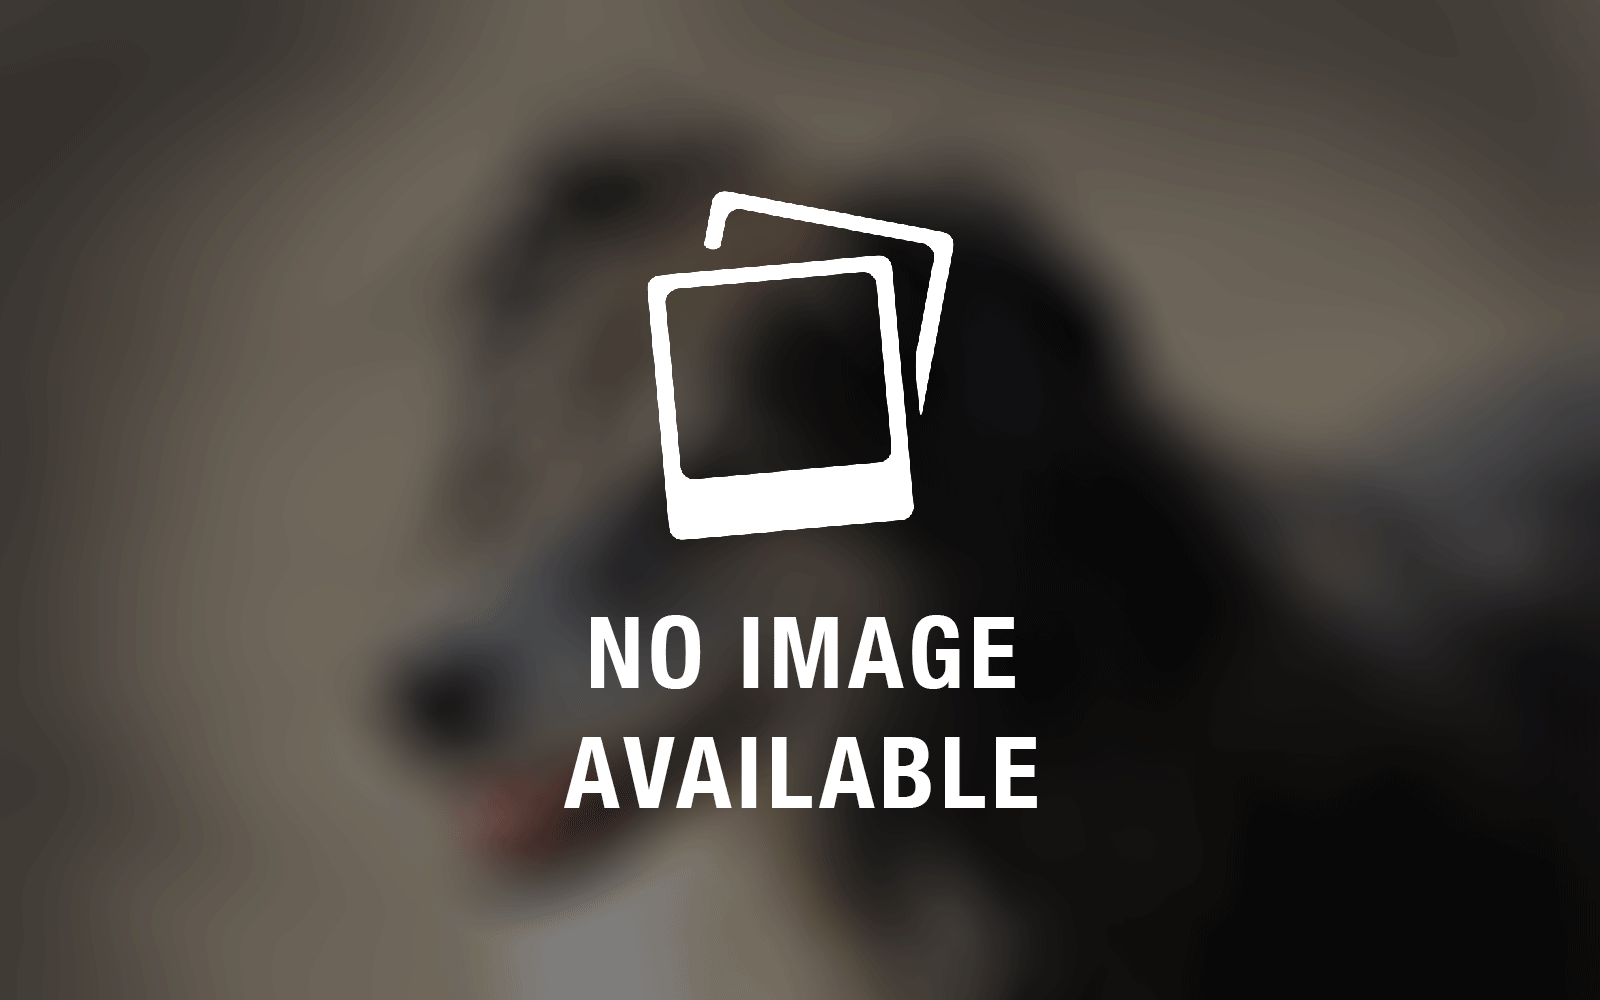 no-image-available Past Litters